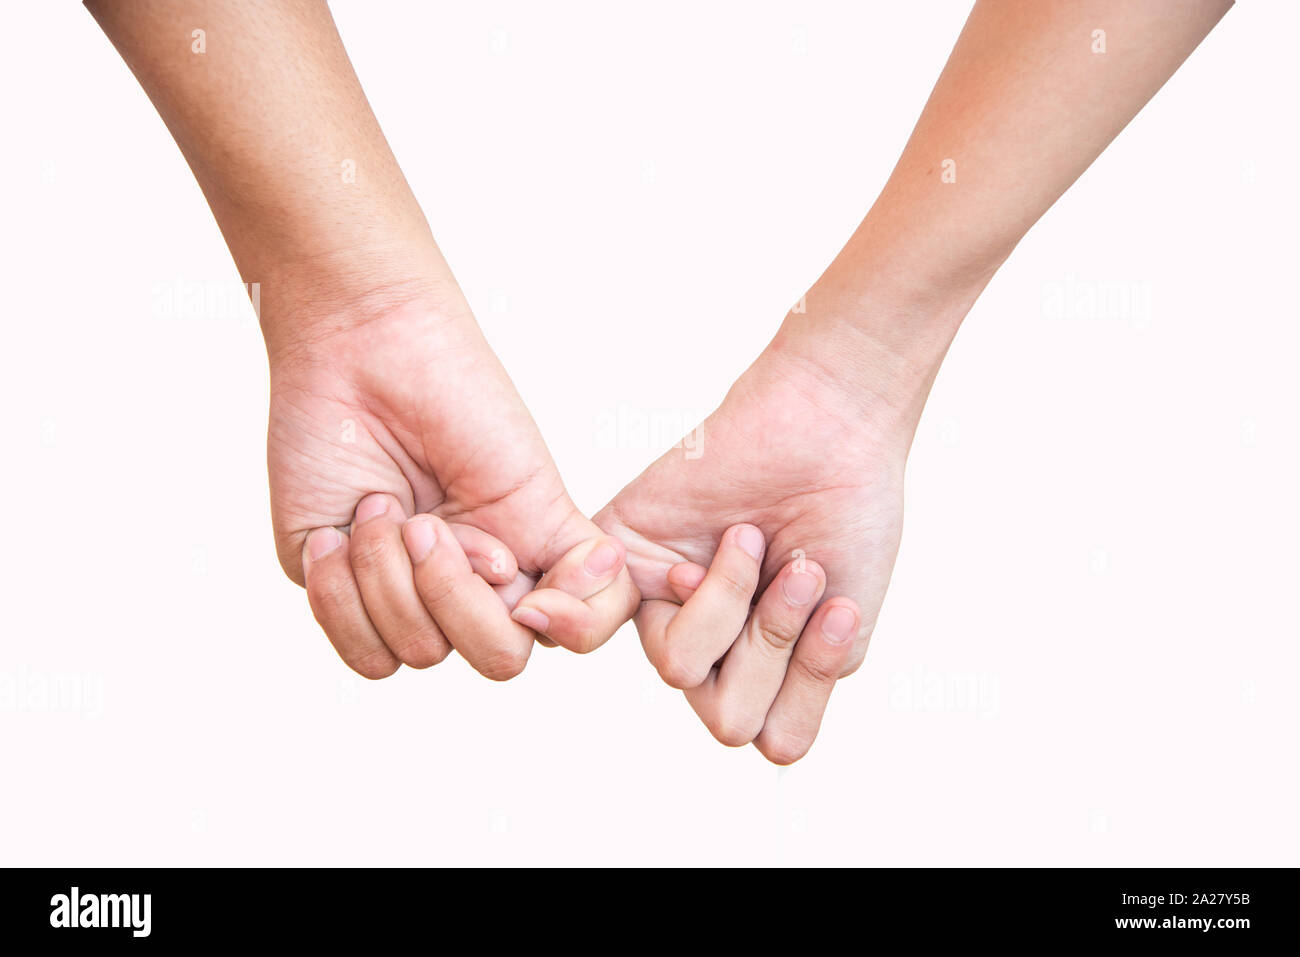 cgildren hand for relationship together on white background Stock Photo